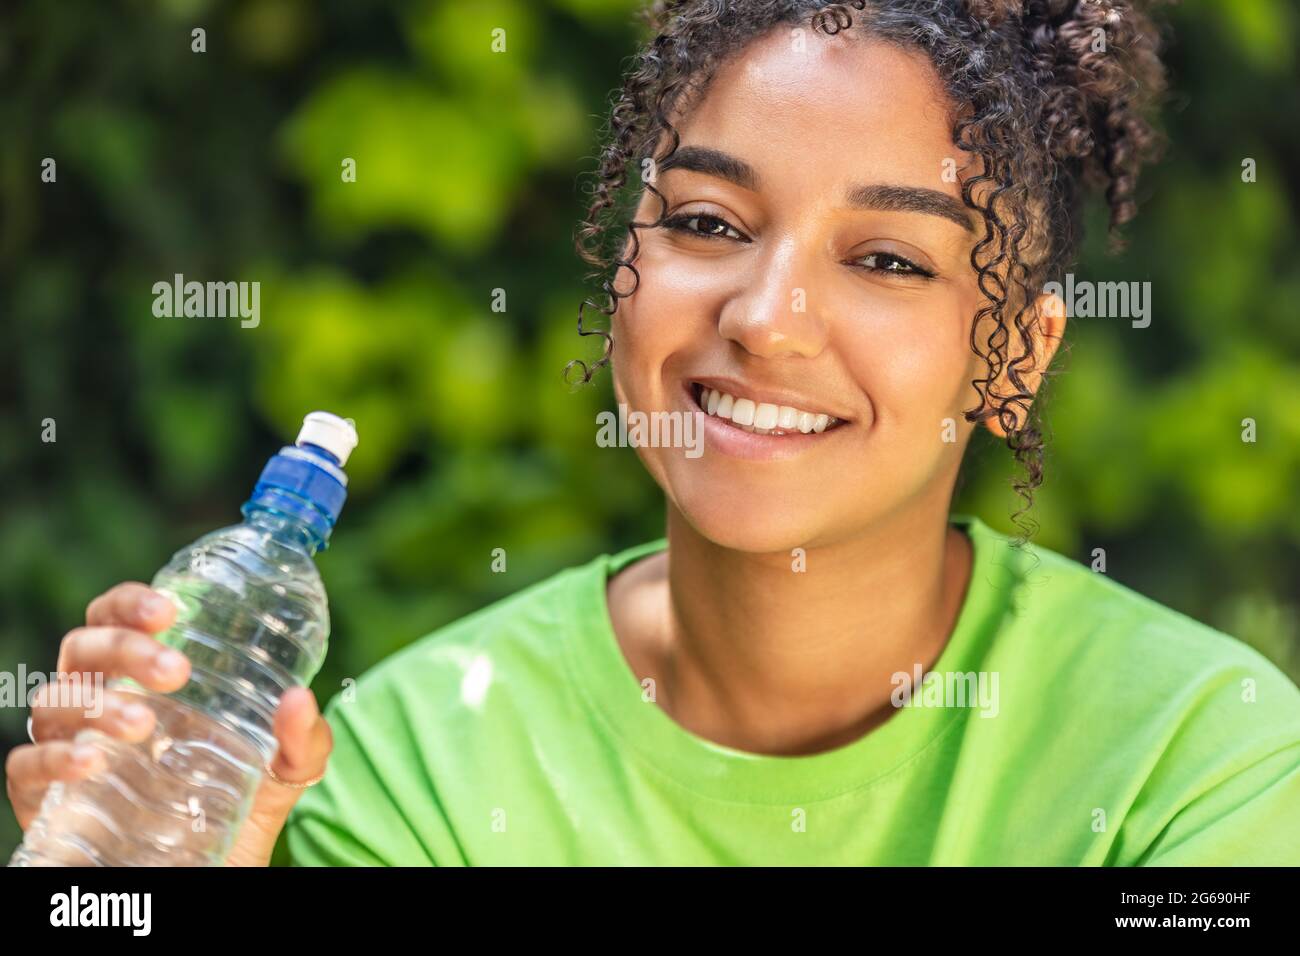 https://c8.alamy.com/comp/2G690HF/outdoor-portrait-of-beautiful-happy-mixed-race-african-american-girl-teenager-female-young-woman-with-perfect-teeth-drinking-water-from-a-bottle-weari-2G690HF.jpg